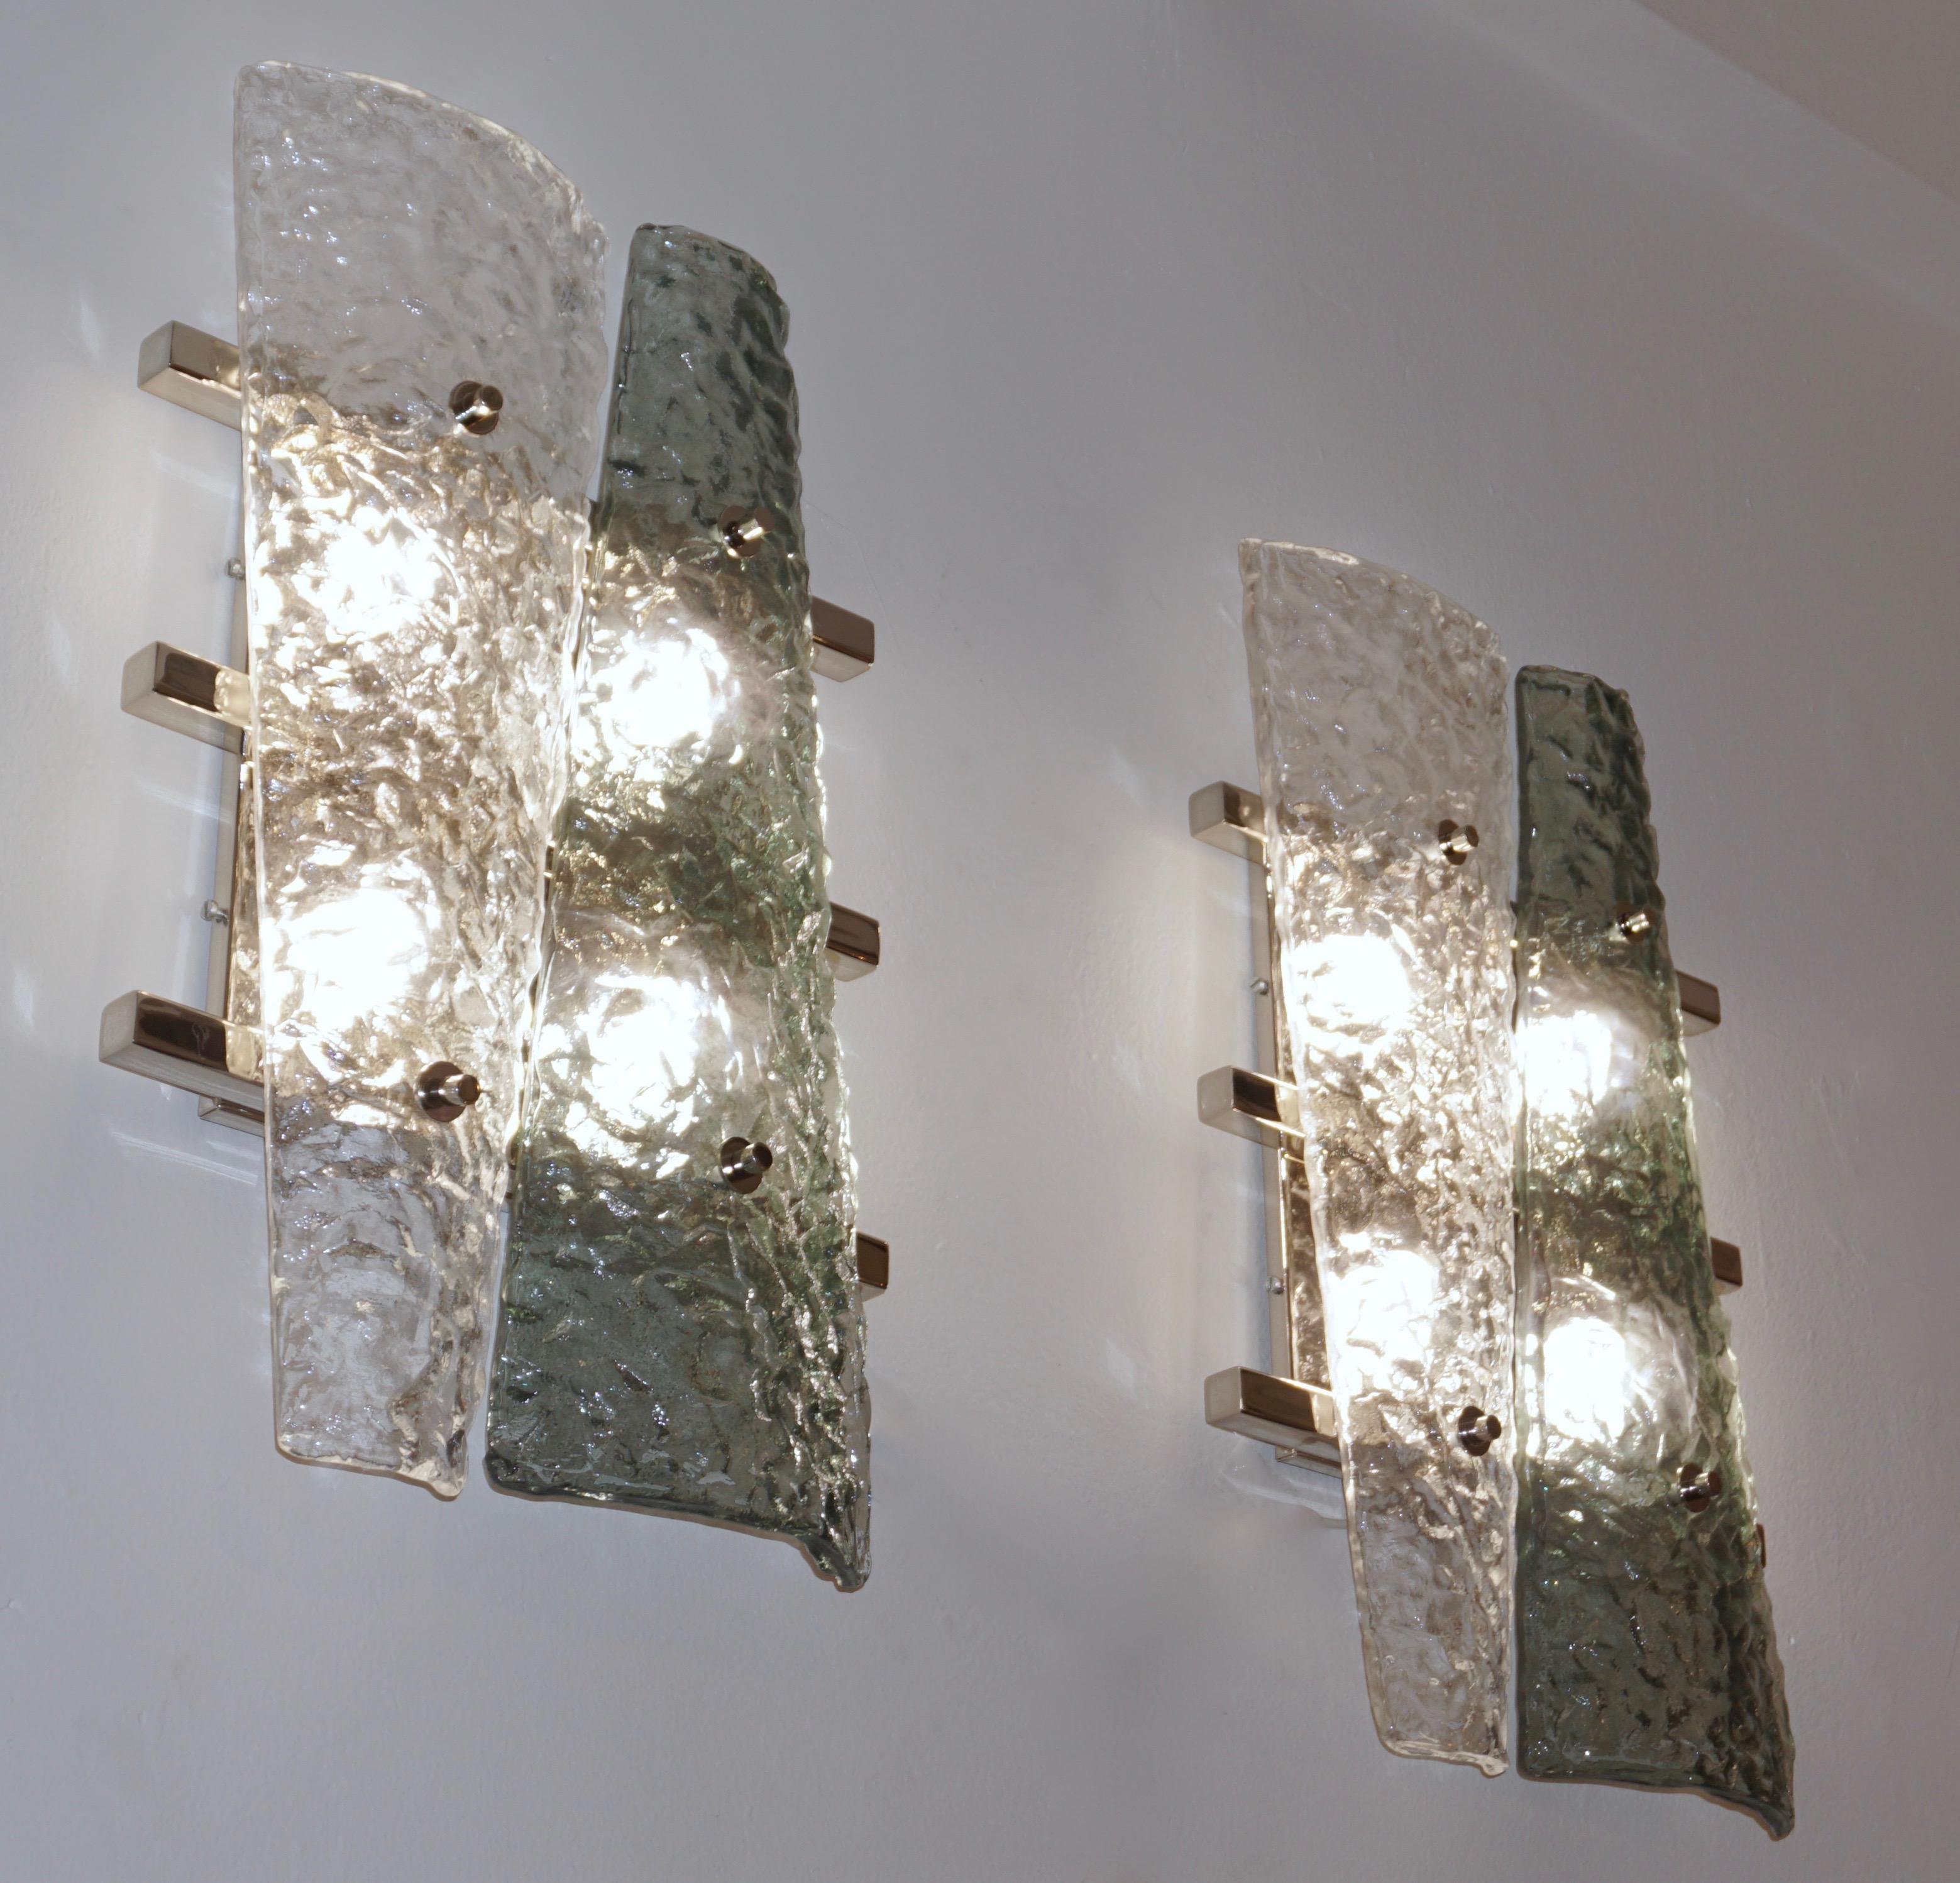 Italian pair of geometric wall lights, entirely handcrafted, the streamlined nickel backplate consisting of a series of 3 horizontal nickel bars supports 2 destructured triangular elements in crystal and aquamarine green Murano glass presenting a